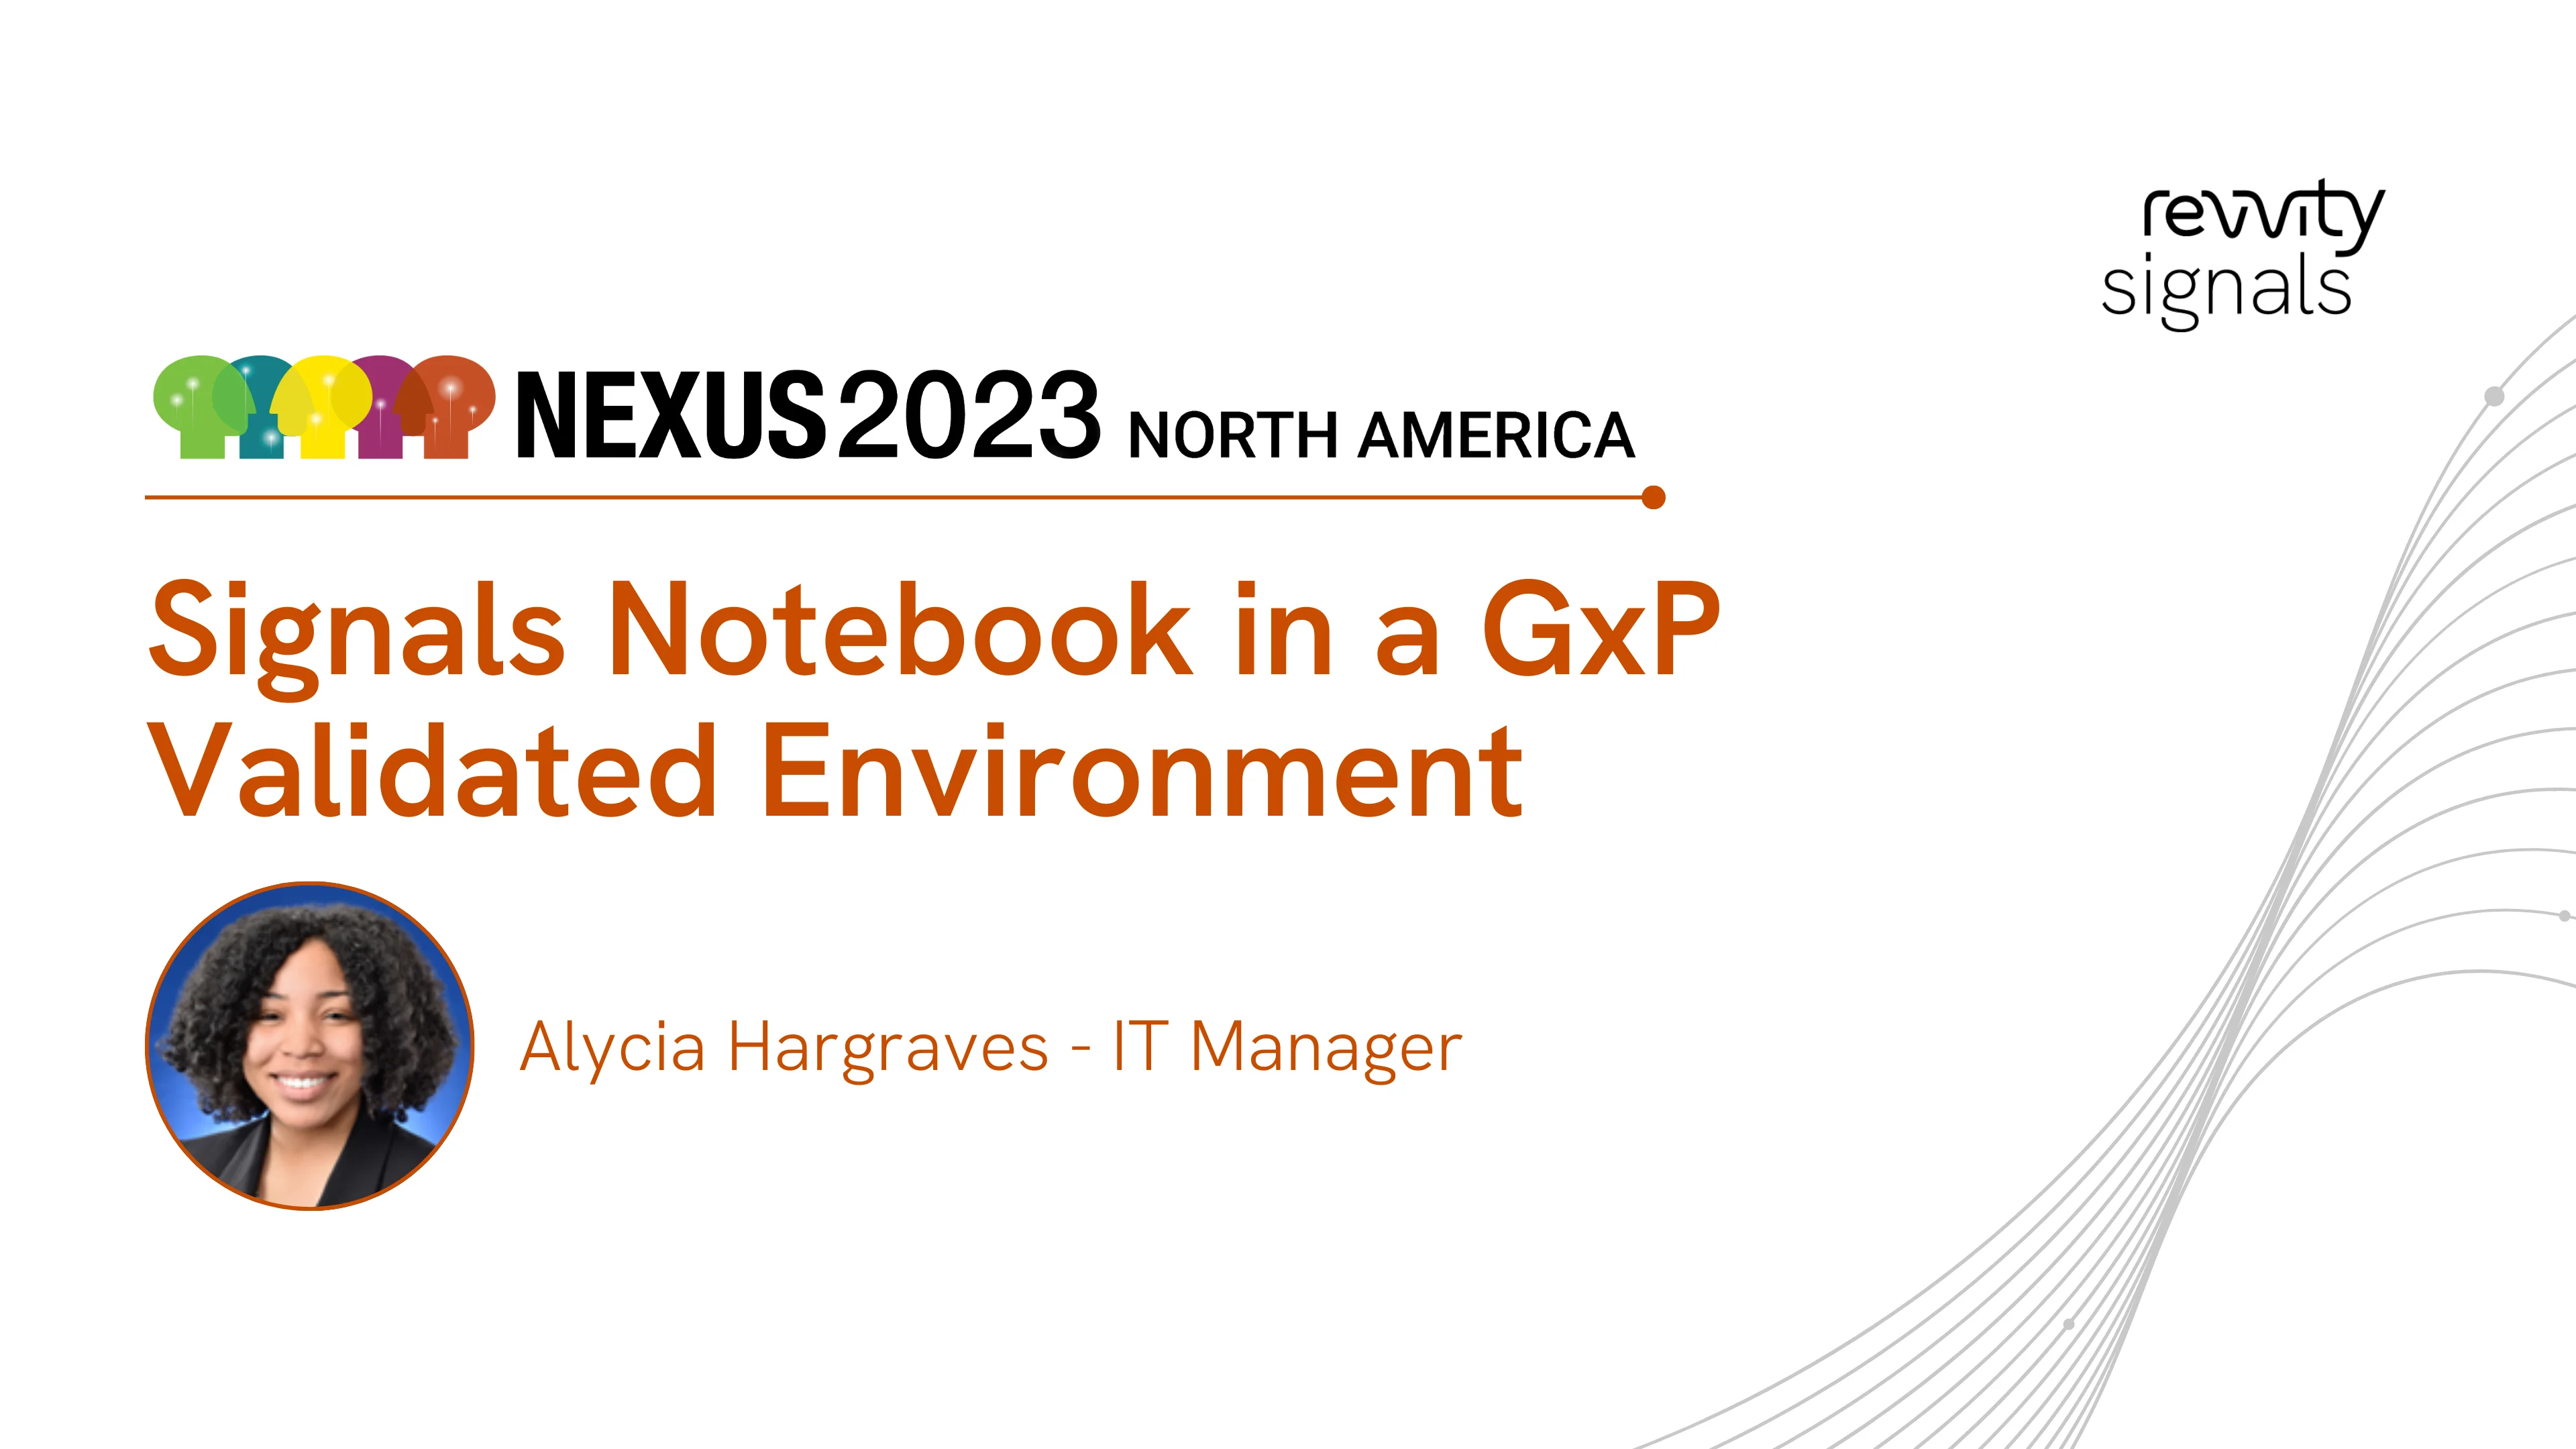 Watch Day 1, NA NEXUS 2023 - Signals Notebook in a GxP Validated Environment on Vimeo.